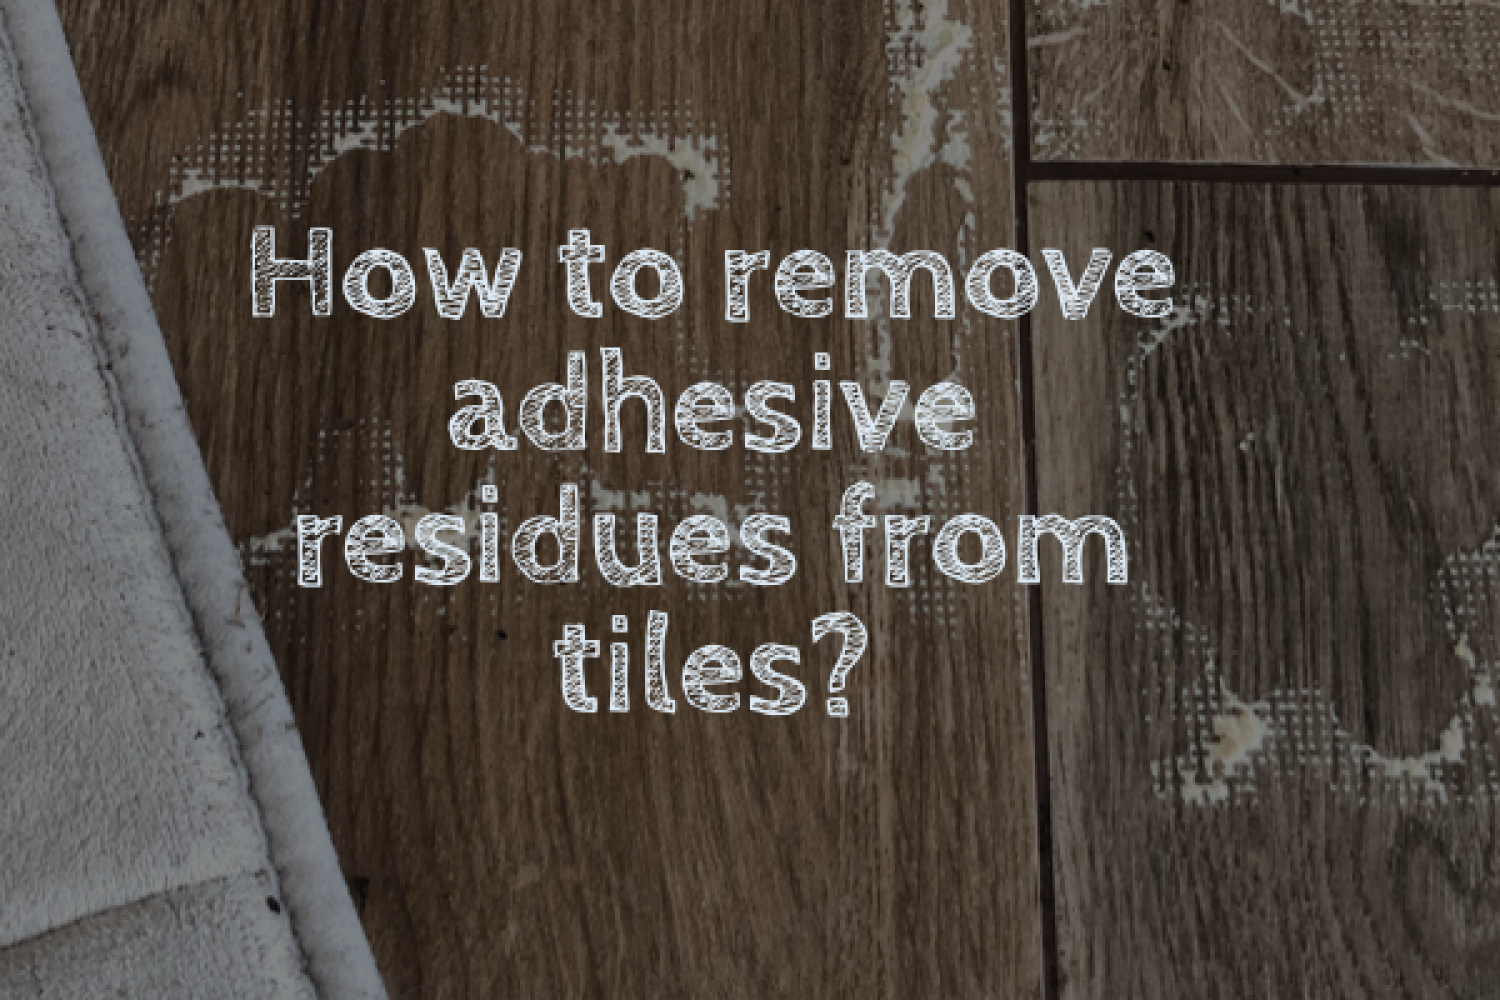 Remove-residues-from-tiles-blogpost.png